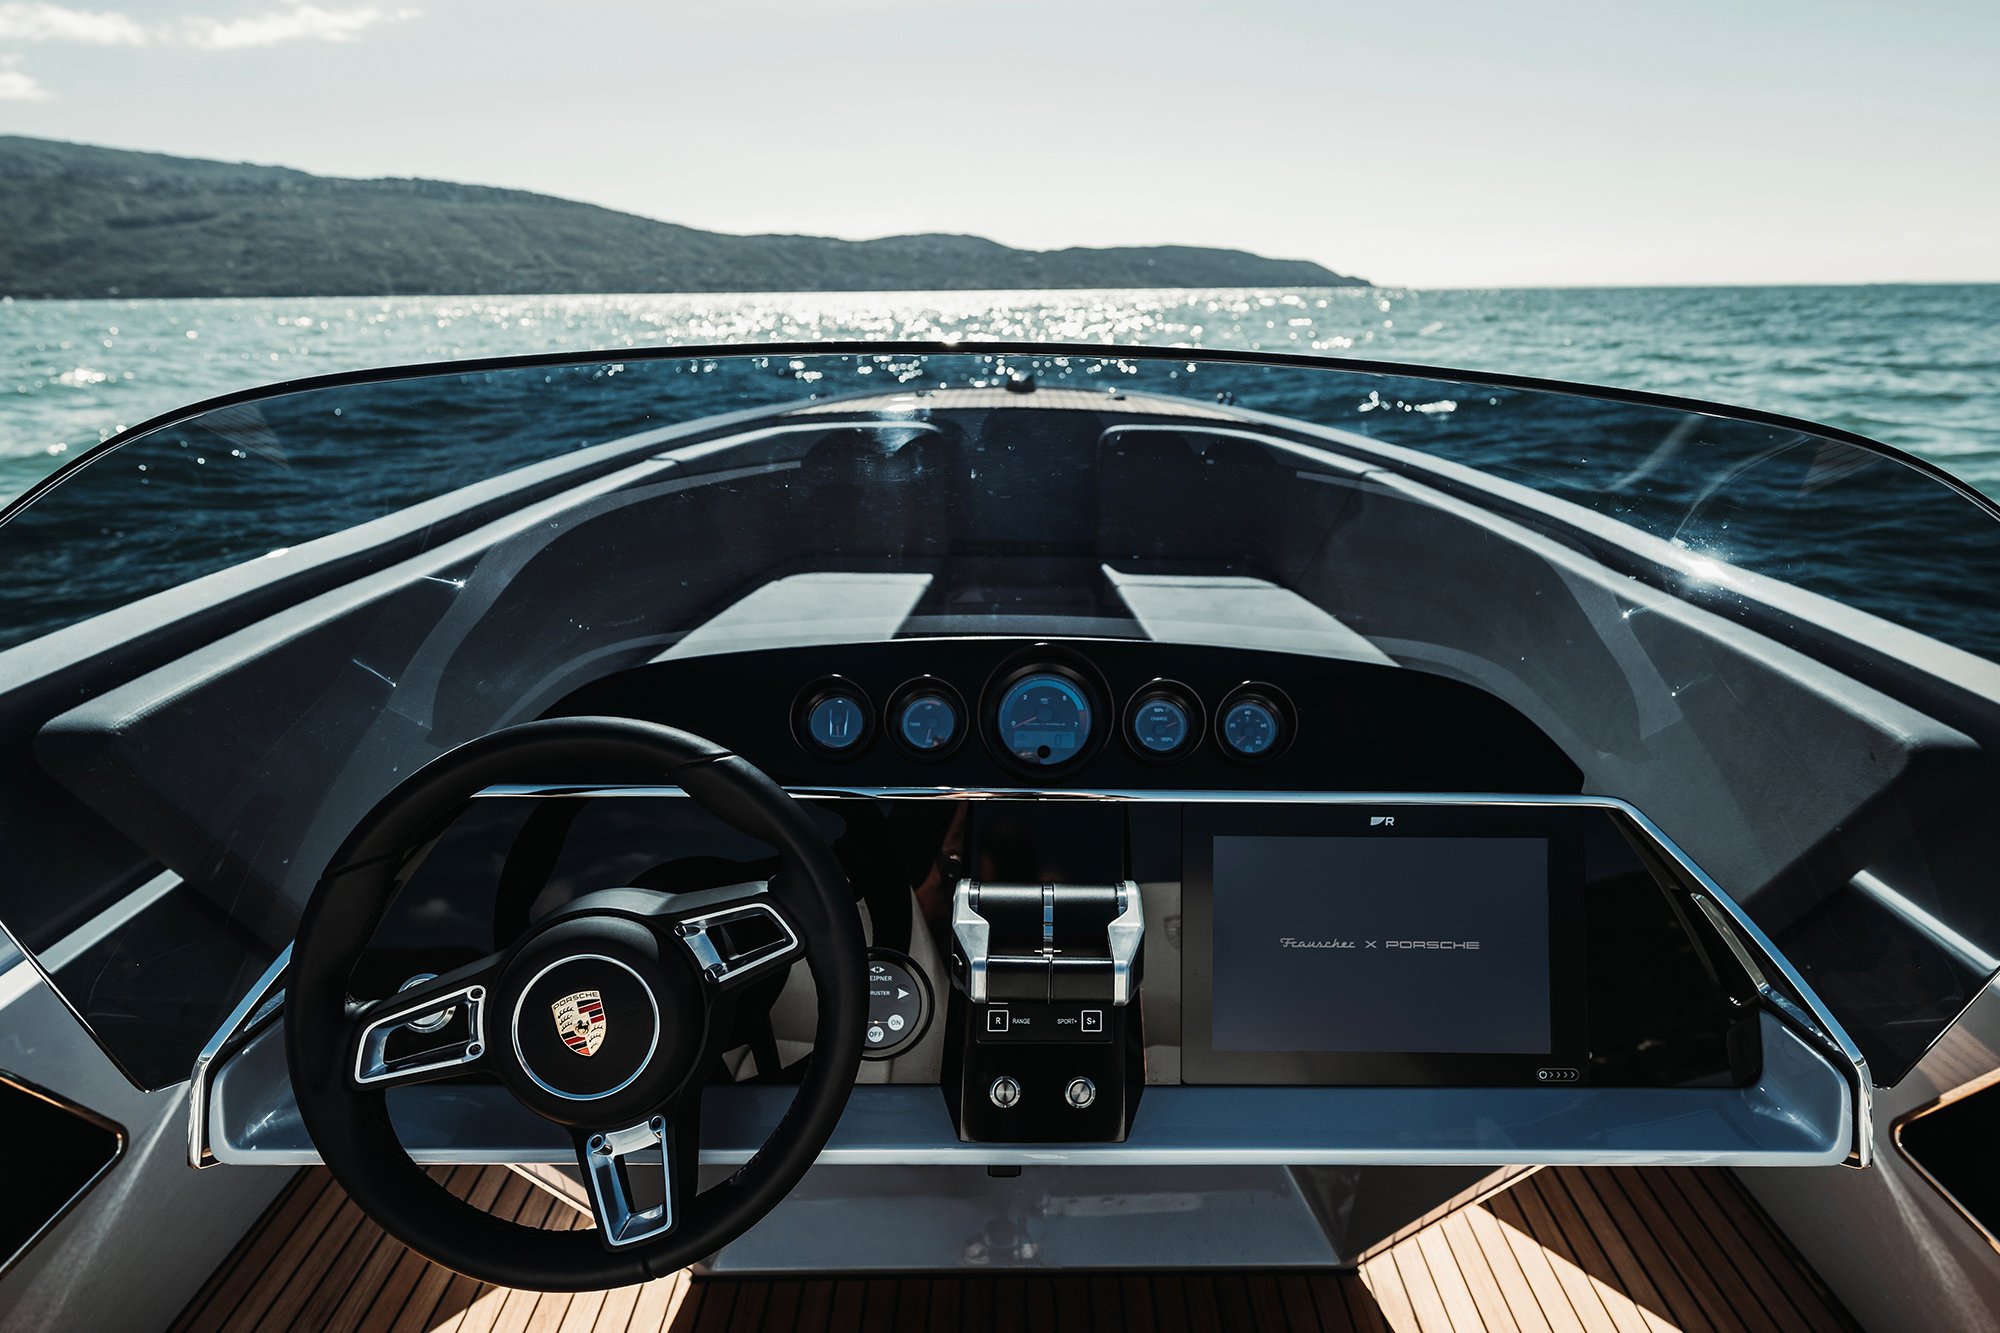 The interior design and the cockpit of the Porsche Frauscher 850 Fantom Air electric boat